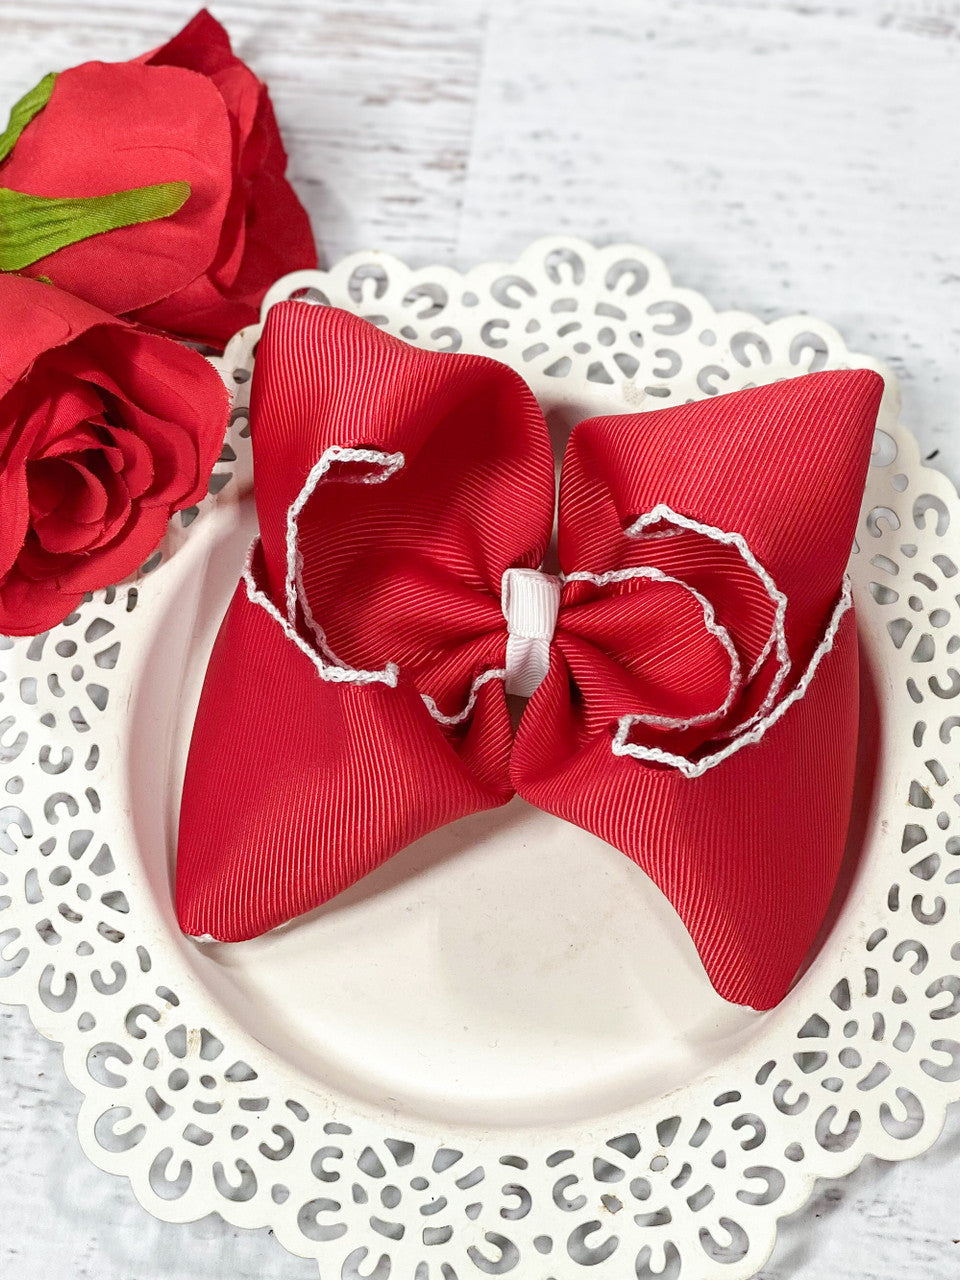 Our moonstitch hair bows are made with 2.25" ribbon and measure approximately 4-5 inches in width with contrast stitch edging.